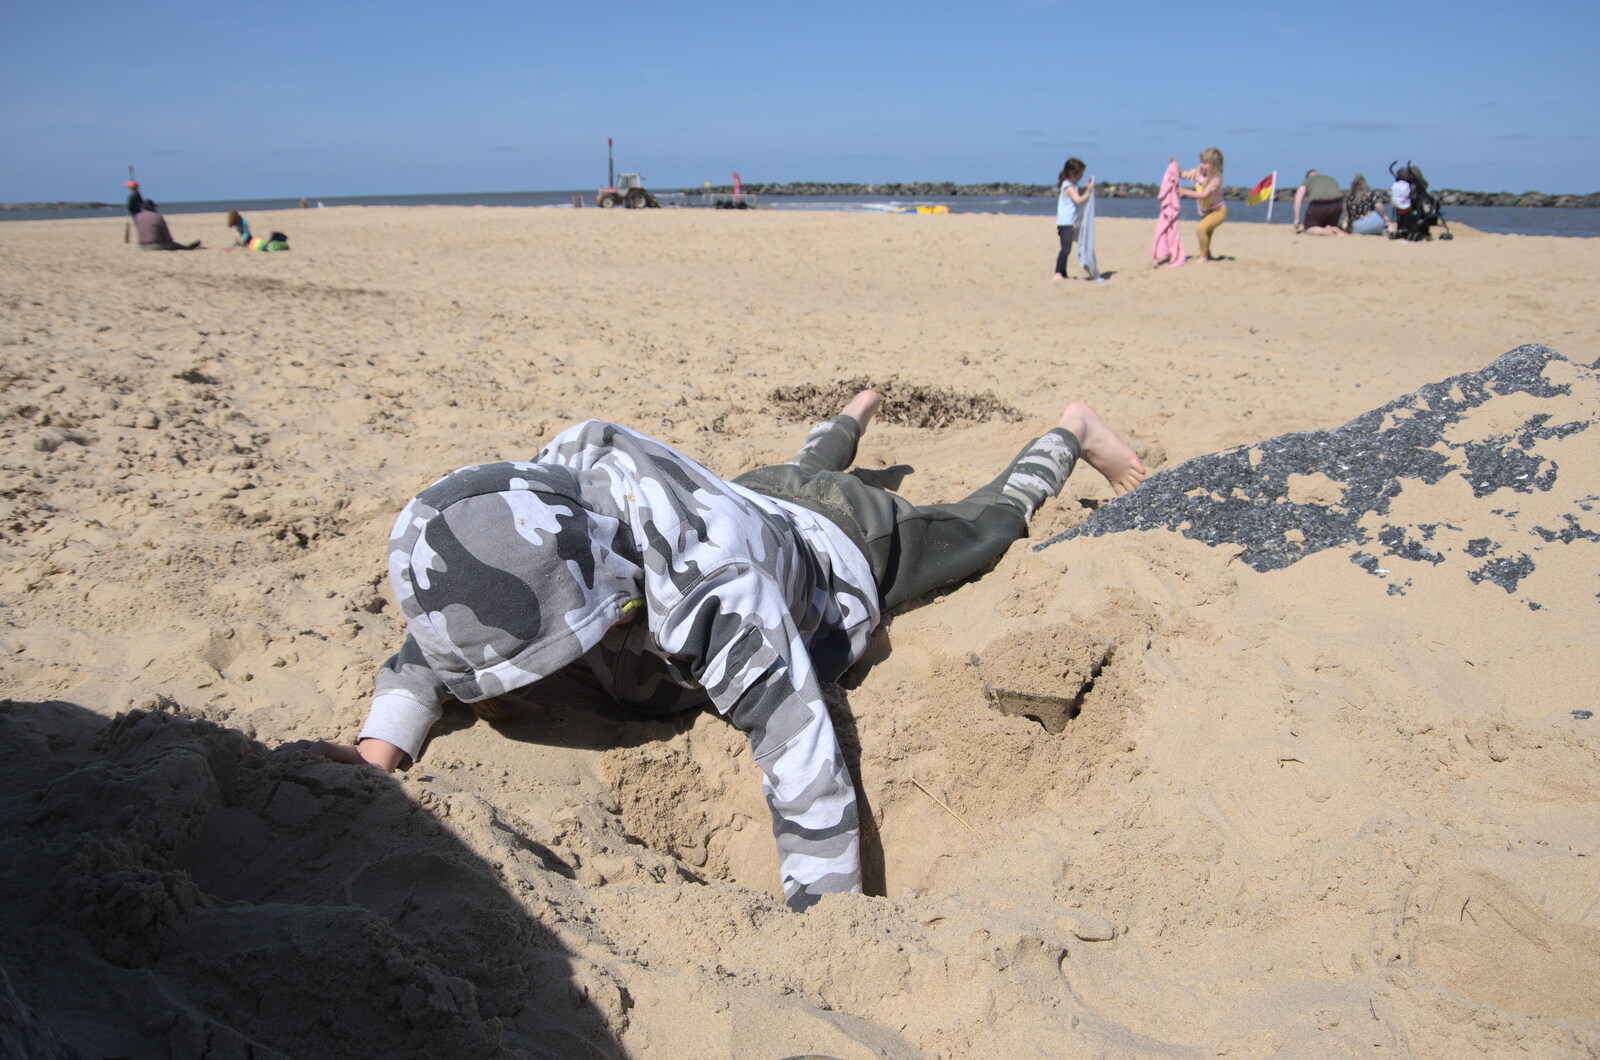 Harry digs a hole in the sand from On the Beach at Sea Palling, Norfolk - 8th May 2022